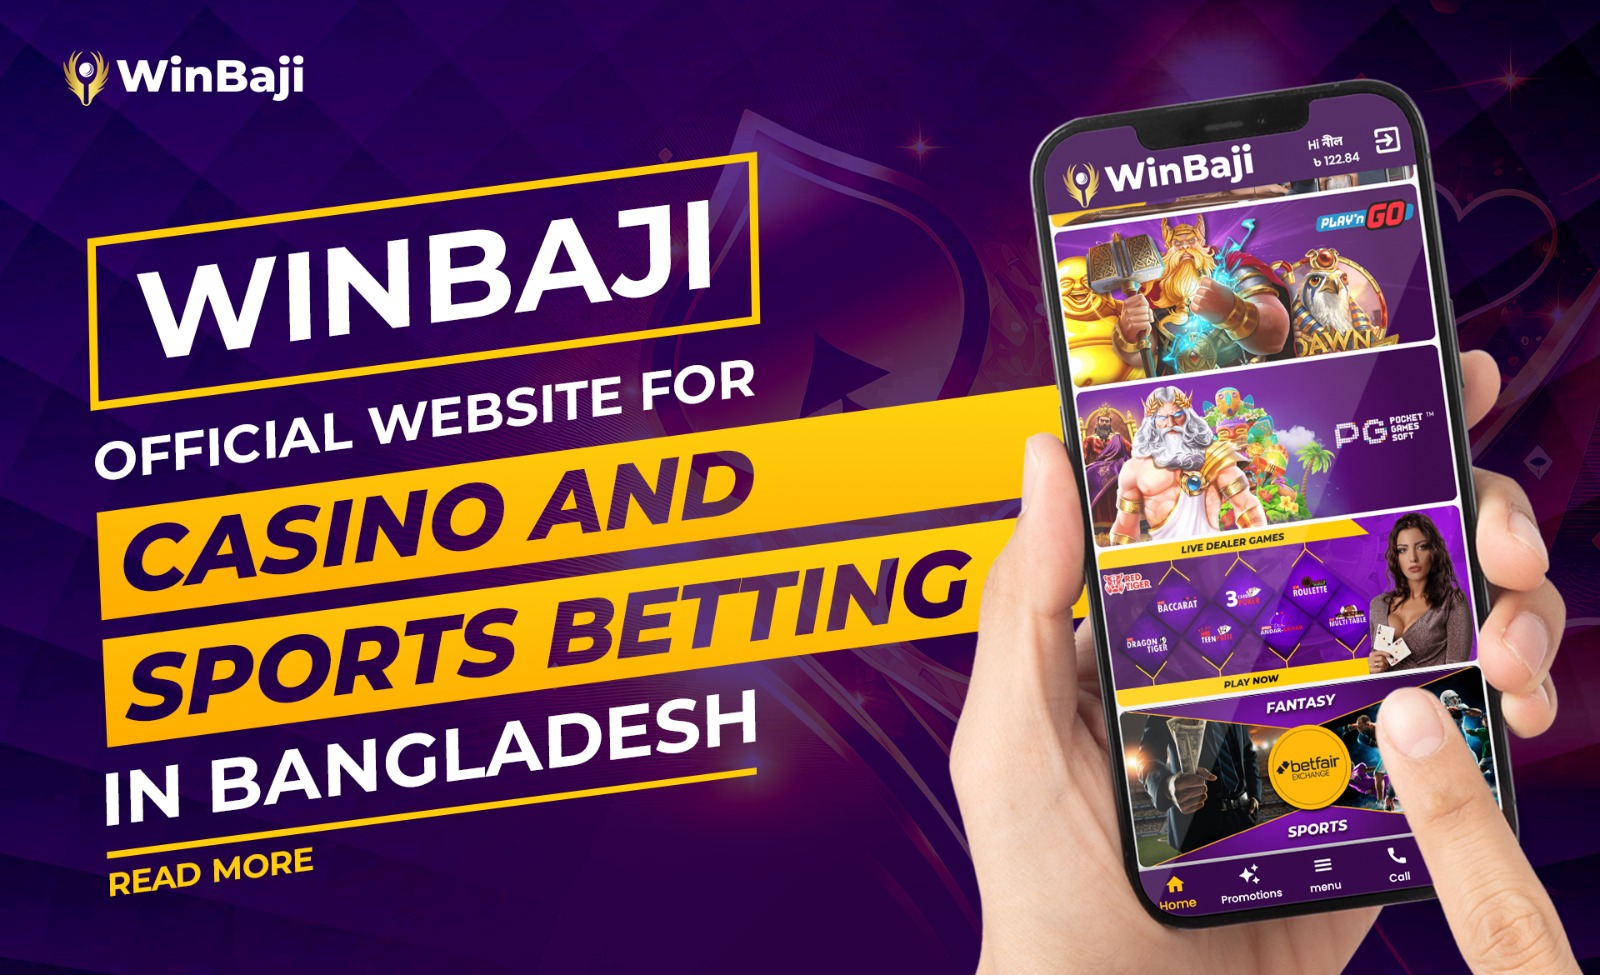 WinBaji- Official Website for Casino and Sports Betting in Bangladesh